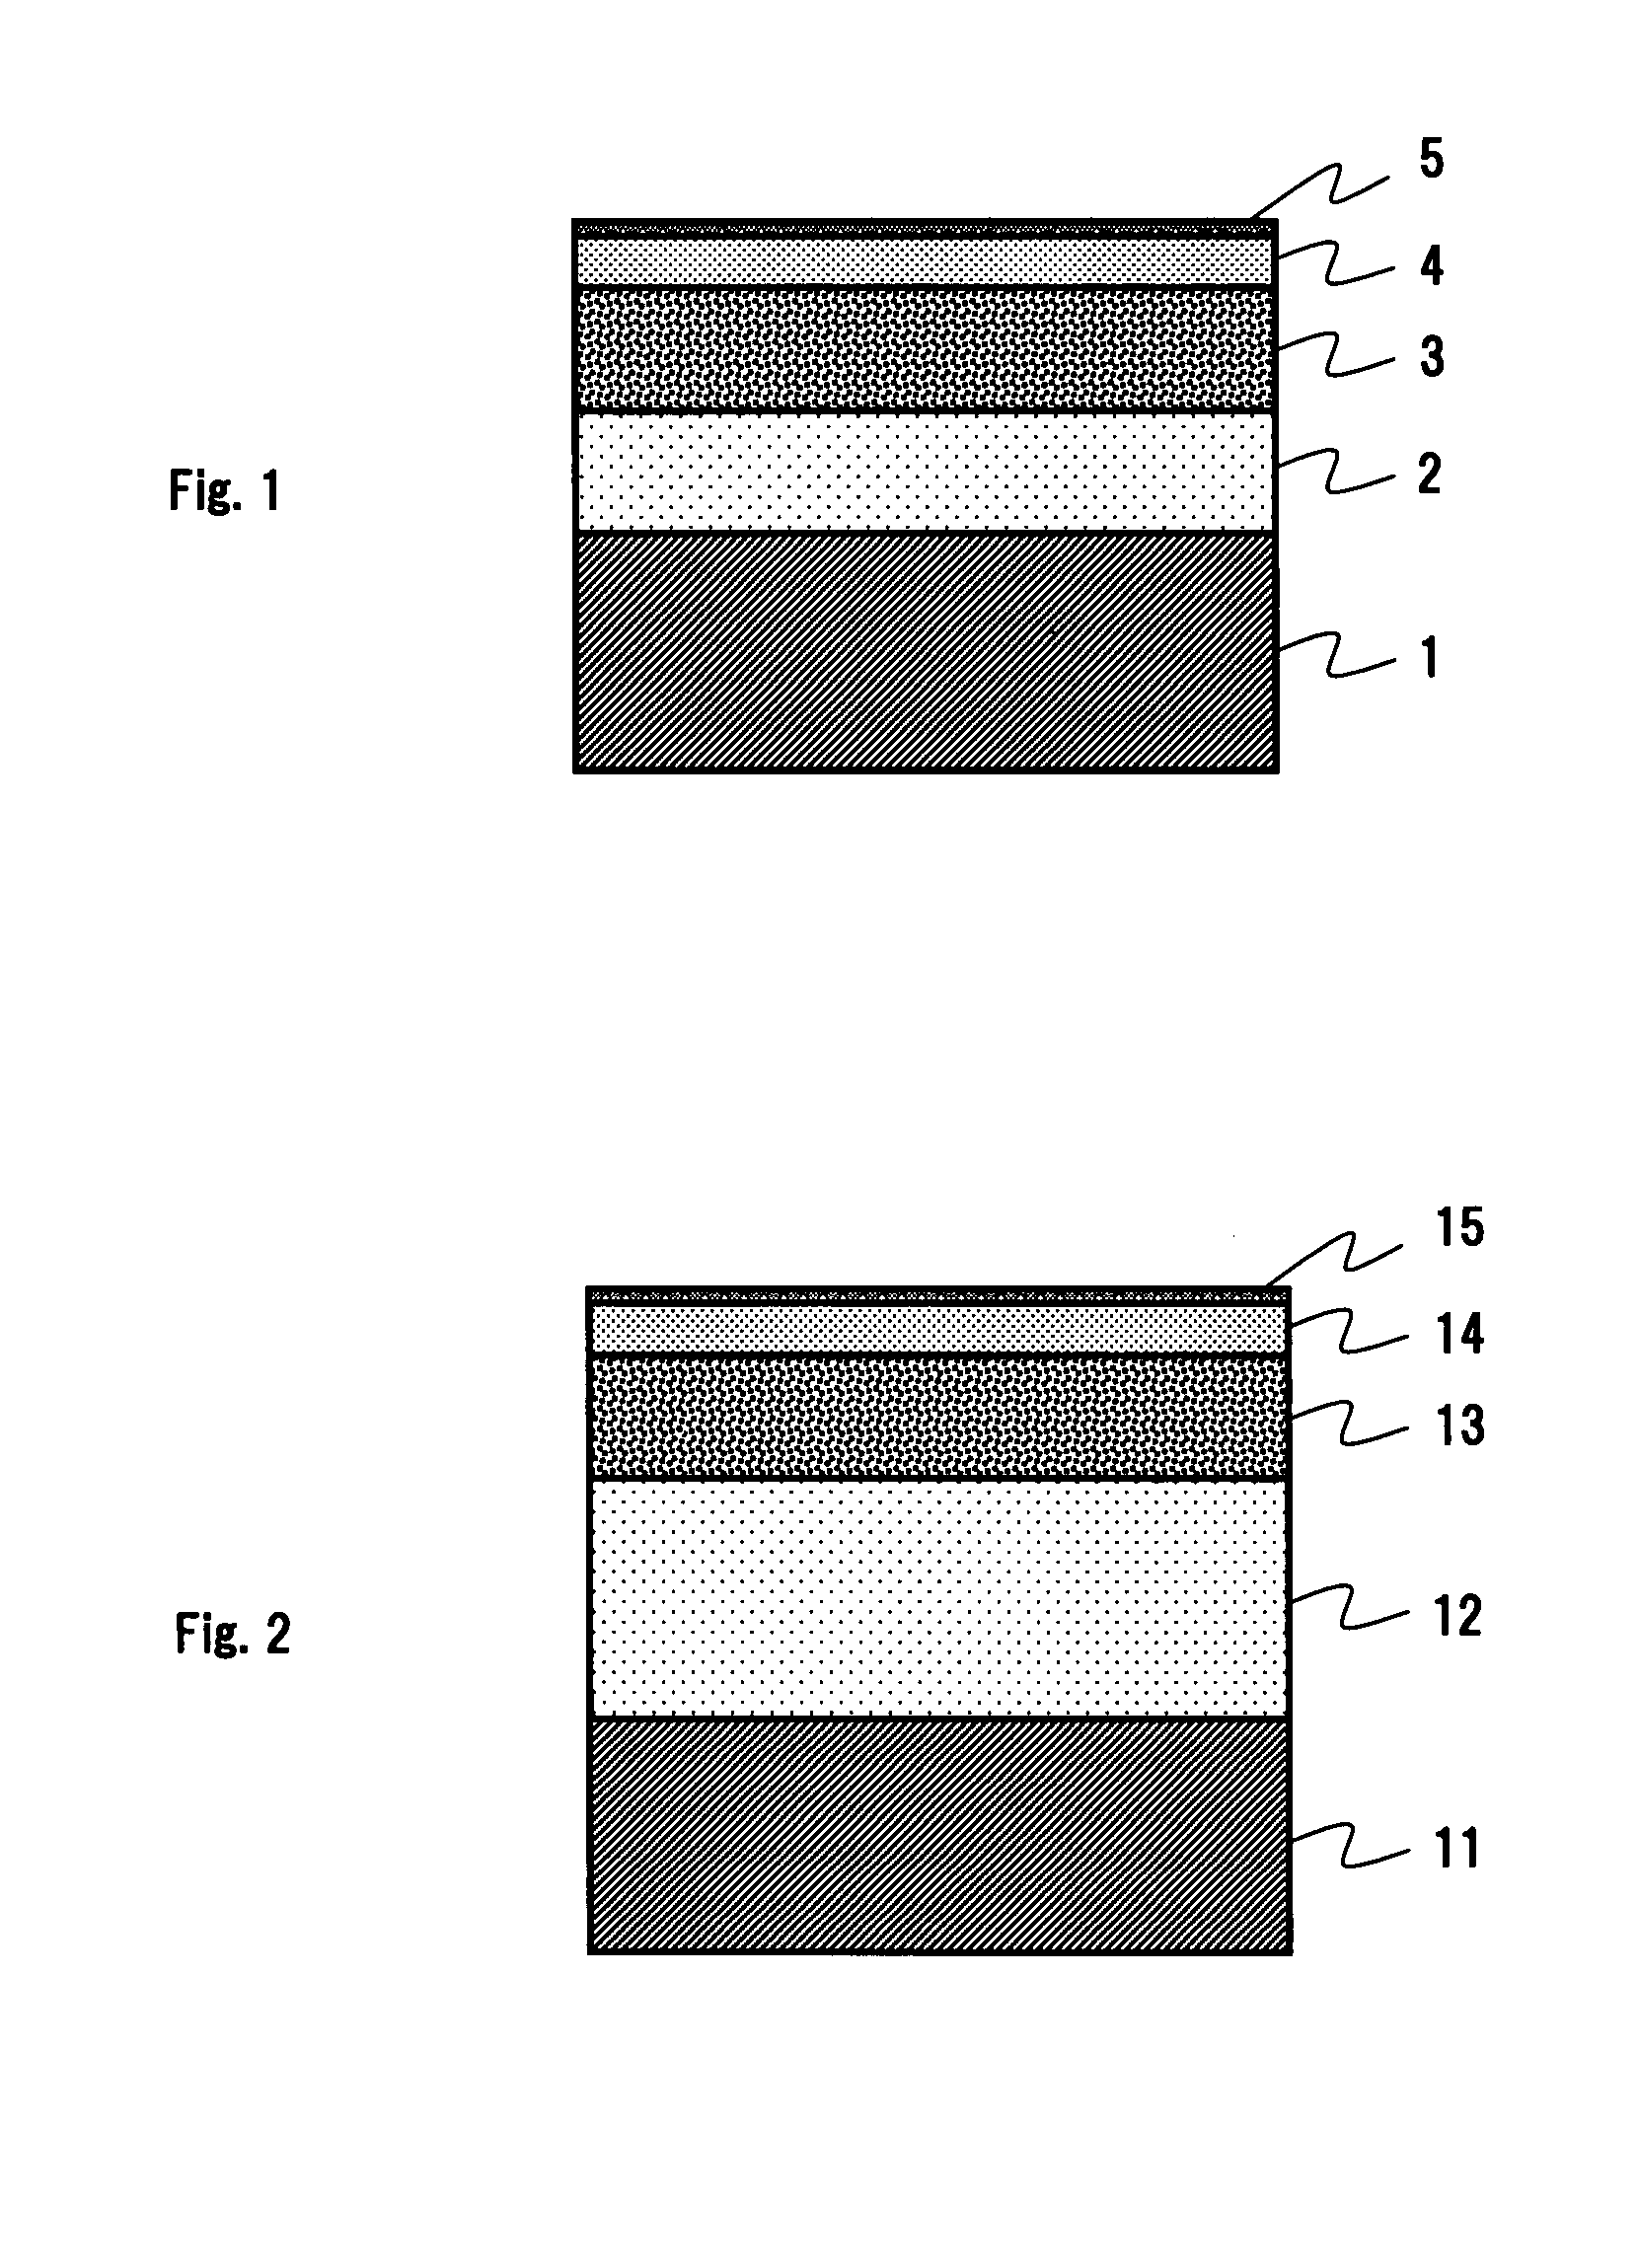 Magnetic circuit and method of applying magnetic field